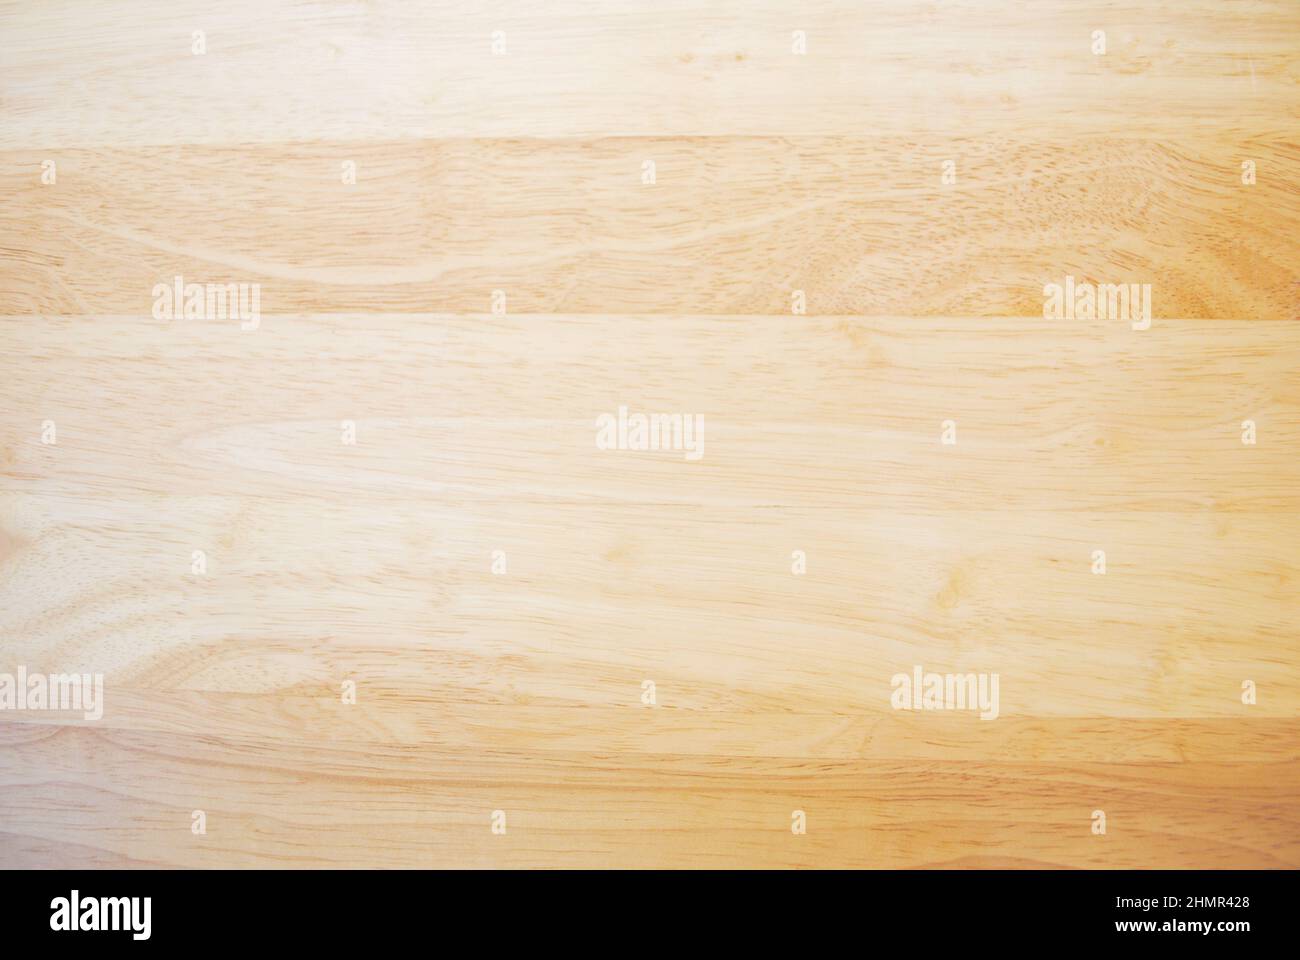 Light Colored Wood Tabletop Background Stock Photo